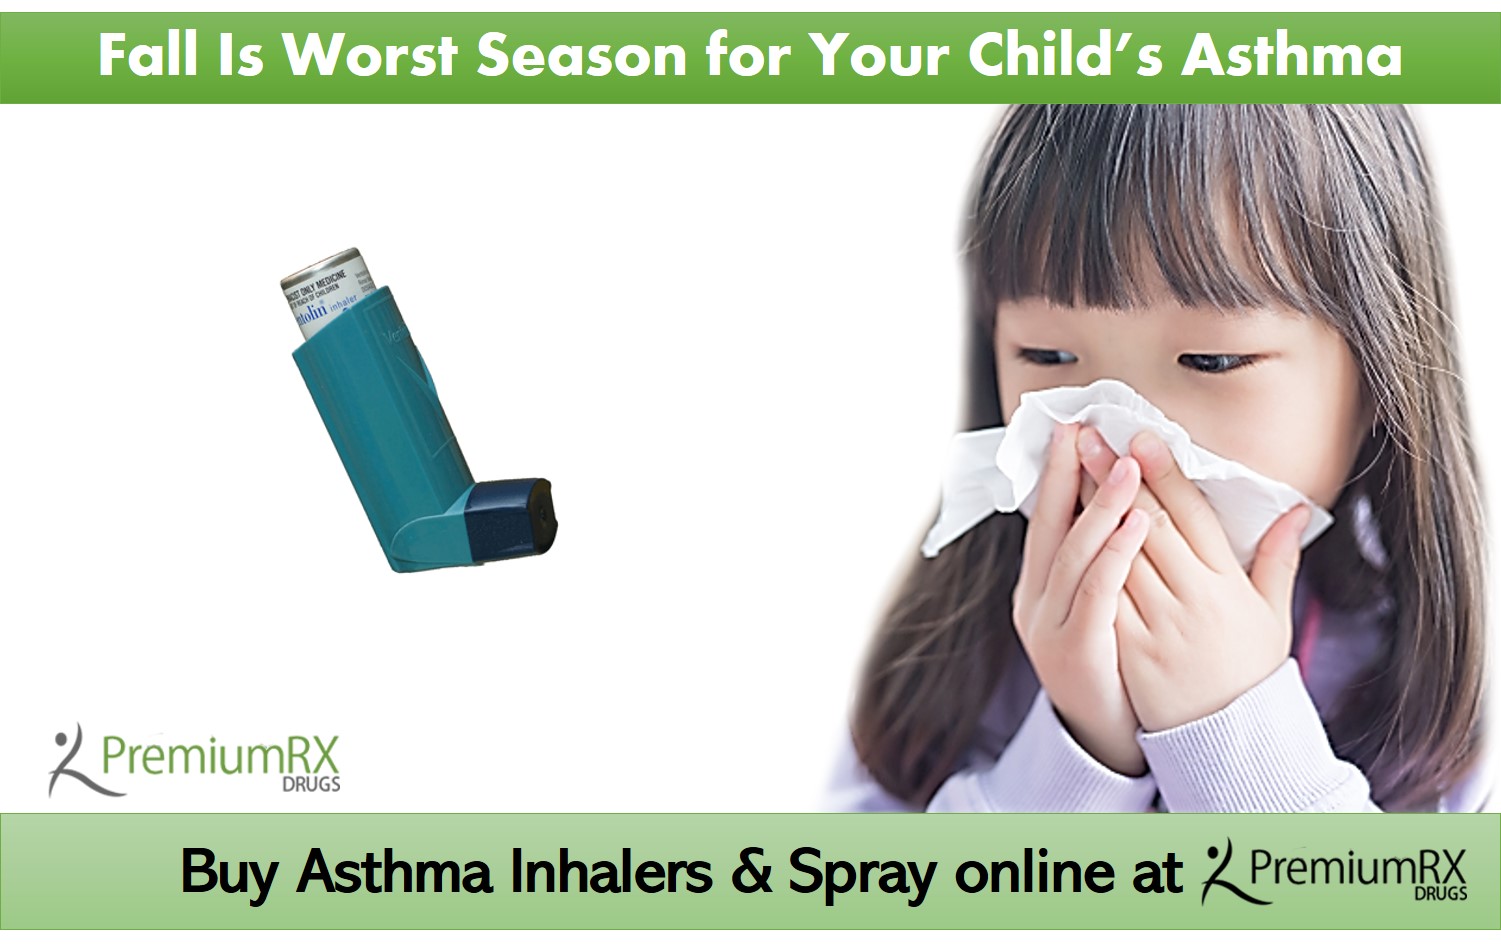 Why Fall Is Worst Season for Your Child’s Asthma